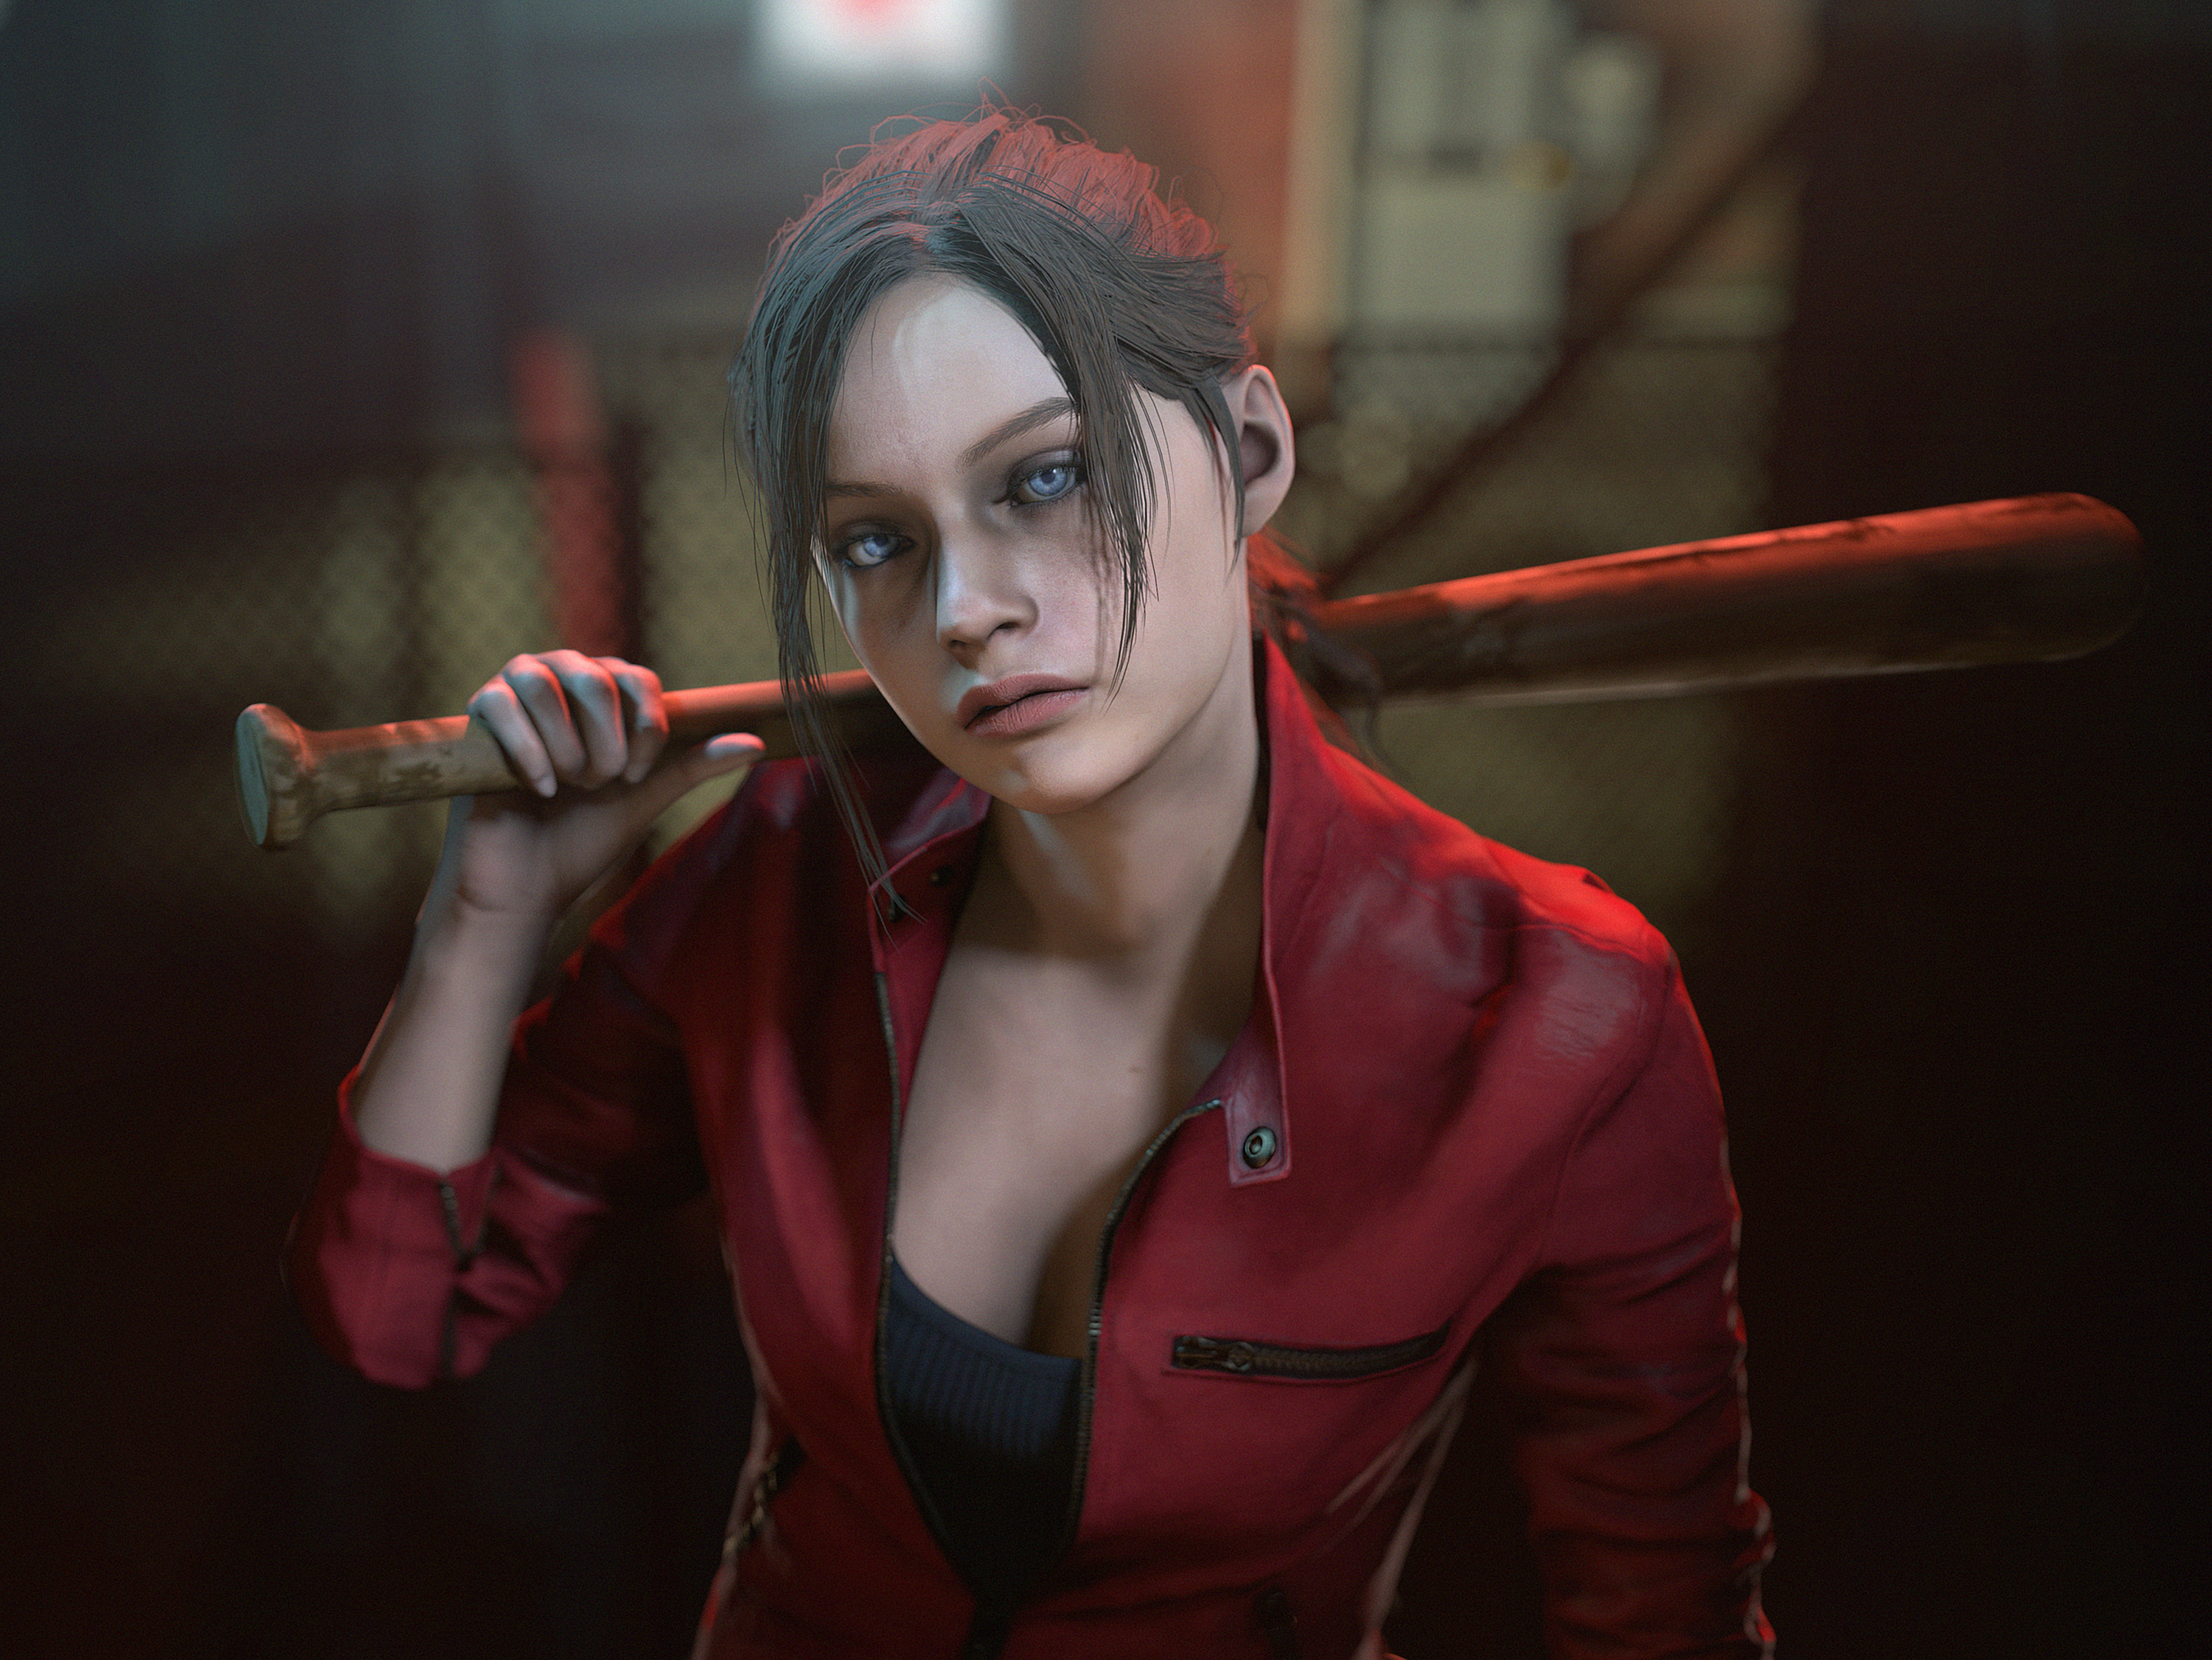 Claire Redfield - Resident Evil 2 Remake by VJokerBoii on